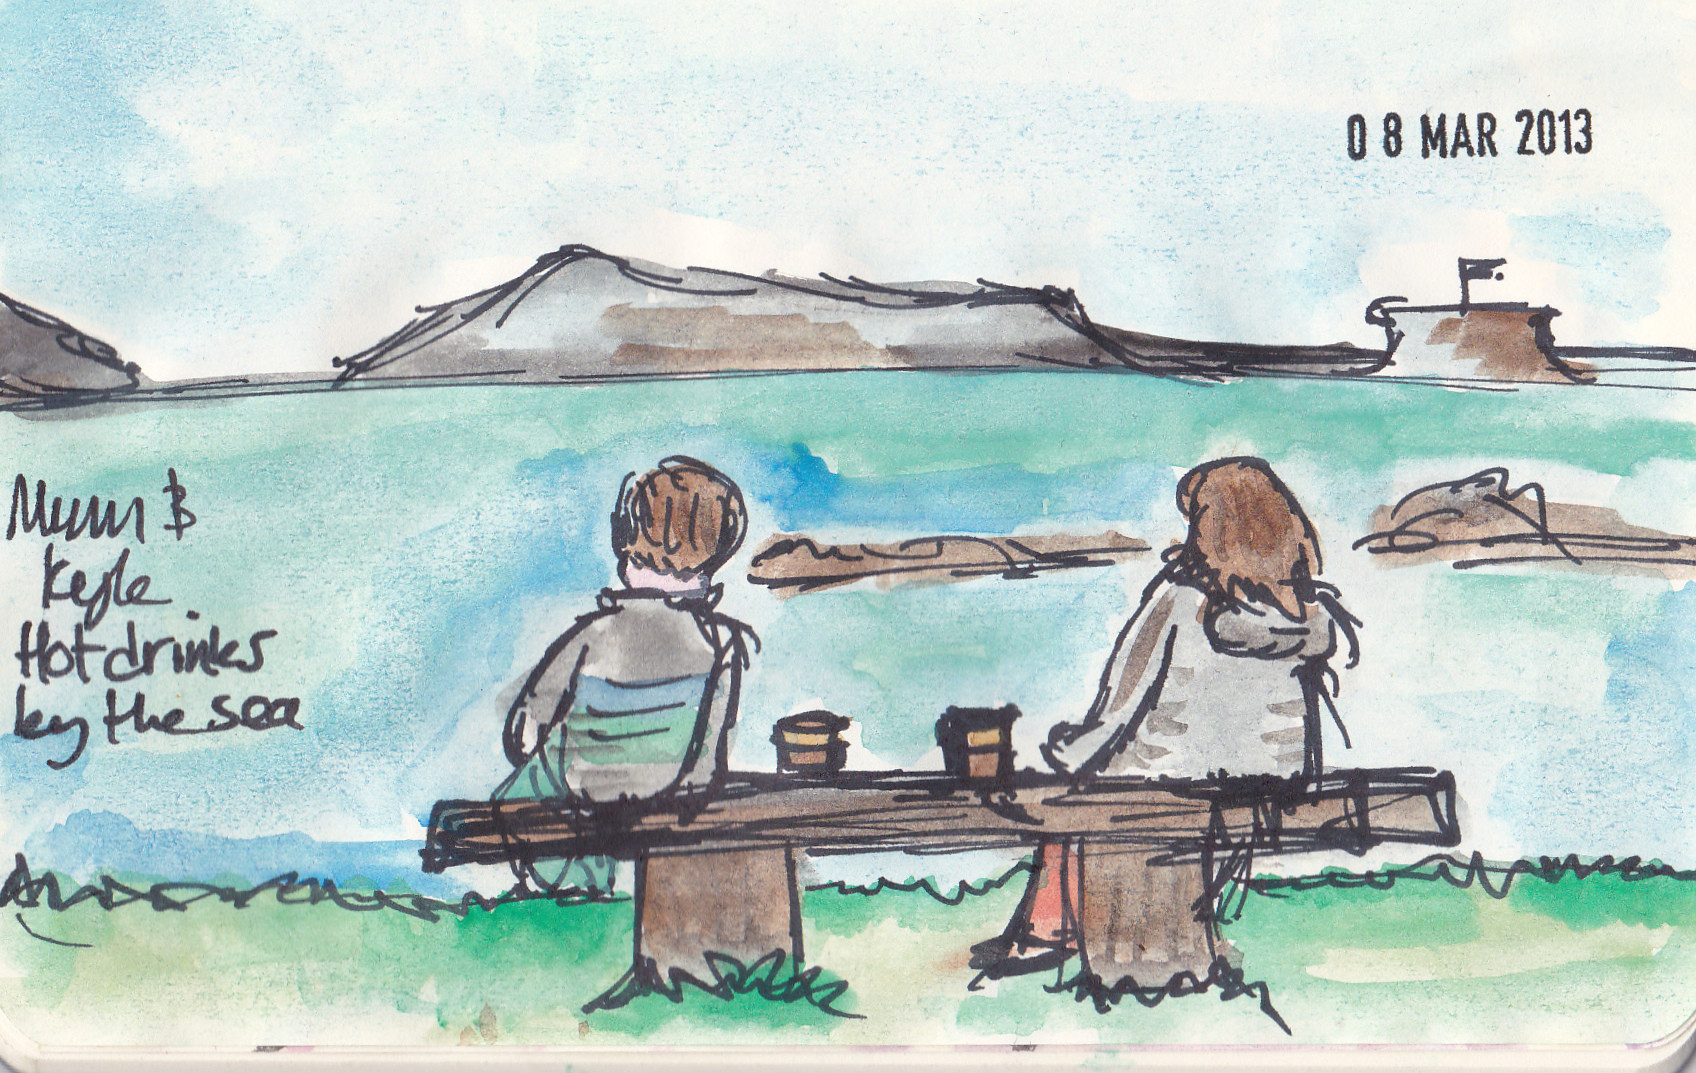 Hot drink’s by the sea